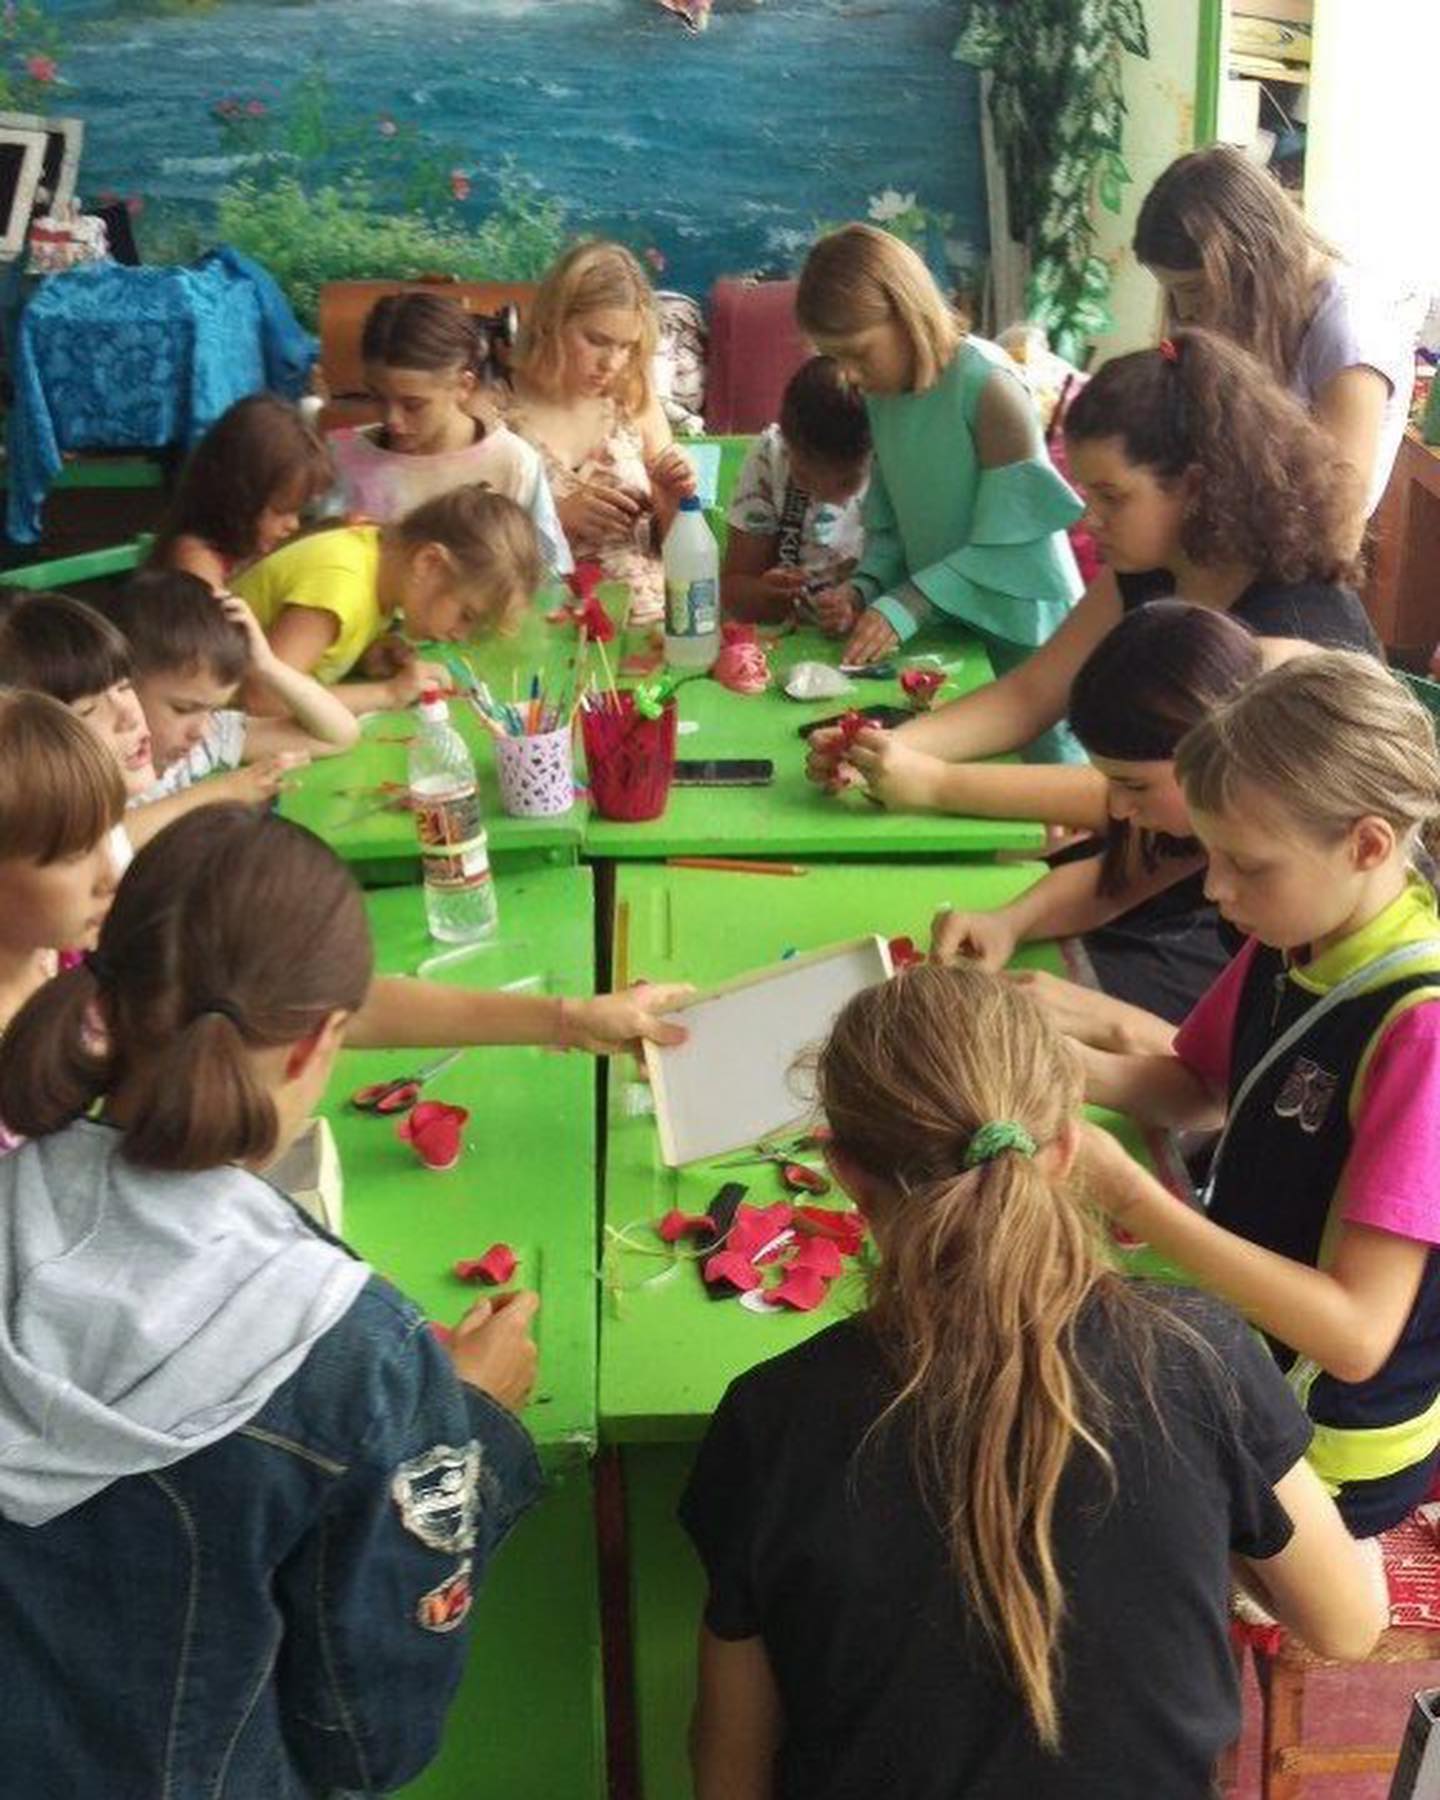 a group of children sitting around a green table.